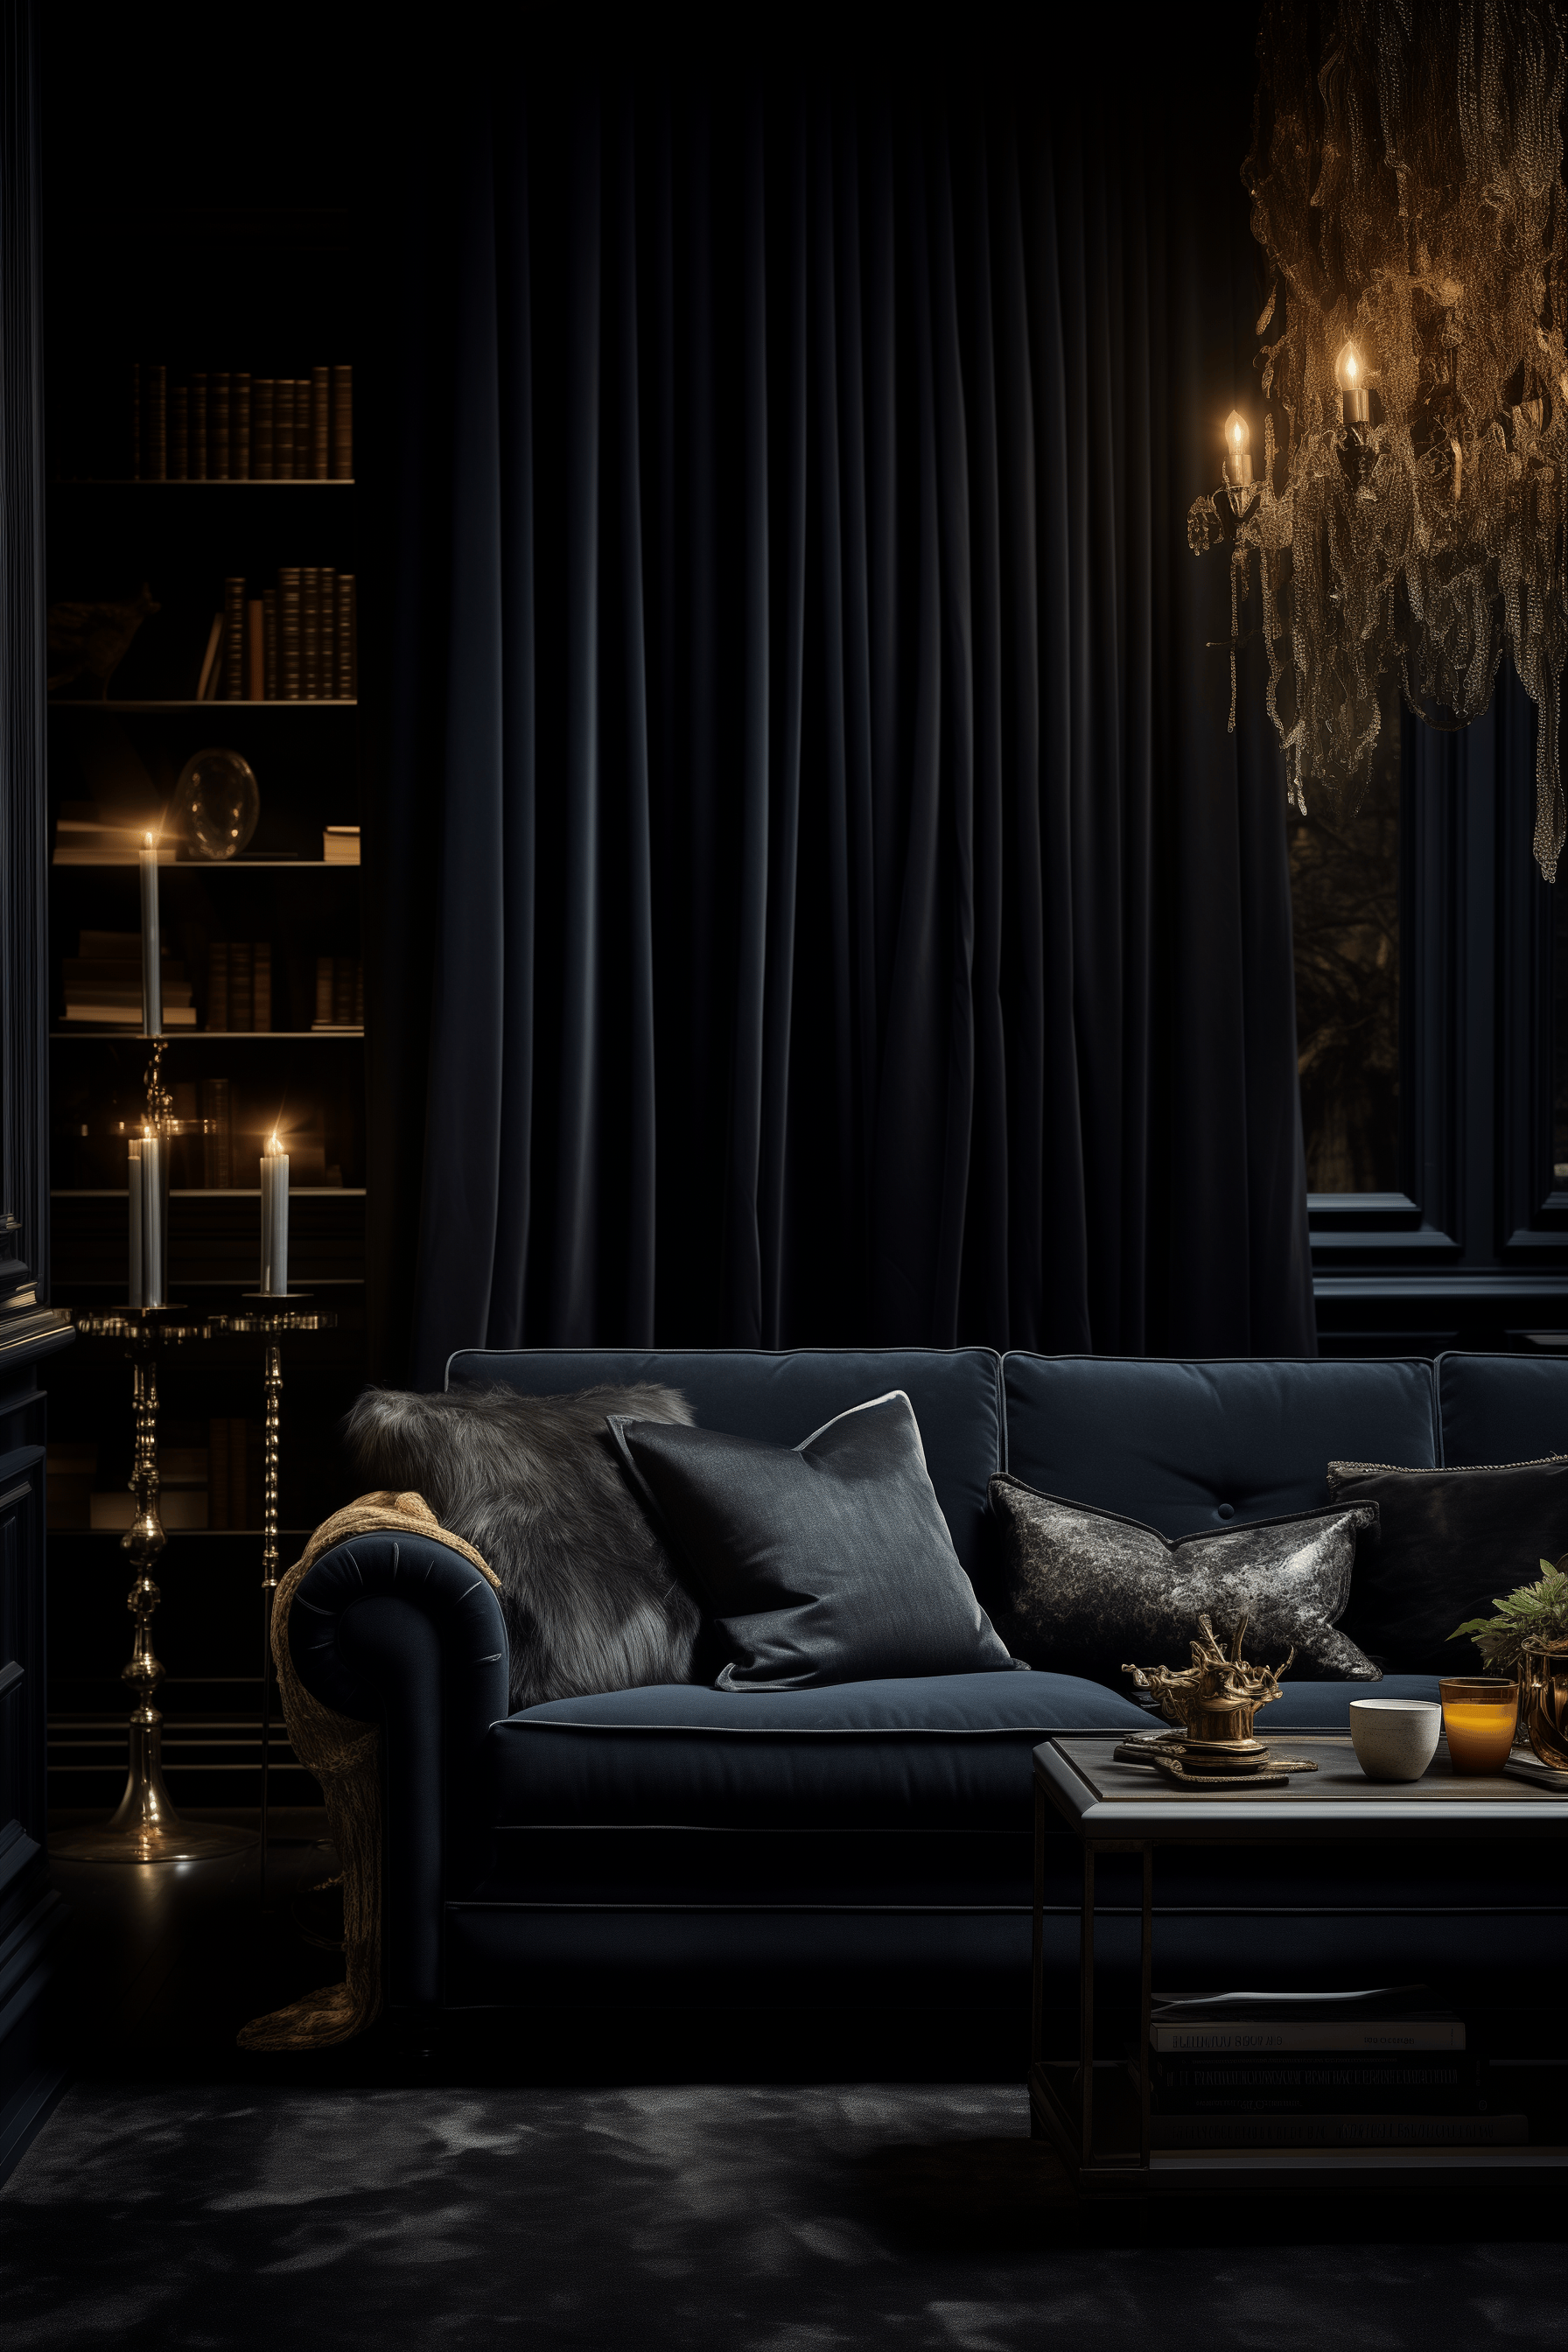 Daylit, dark living room in a luxury real estate setting, photographed at eye-level, highlighting cozy textiles and designer elements.